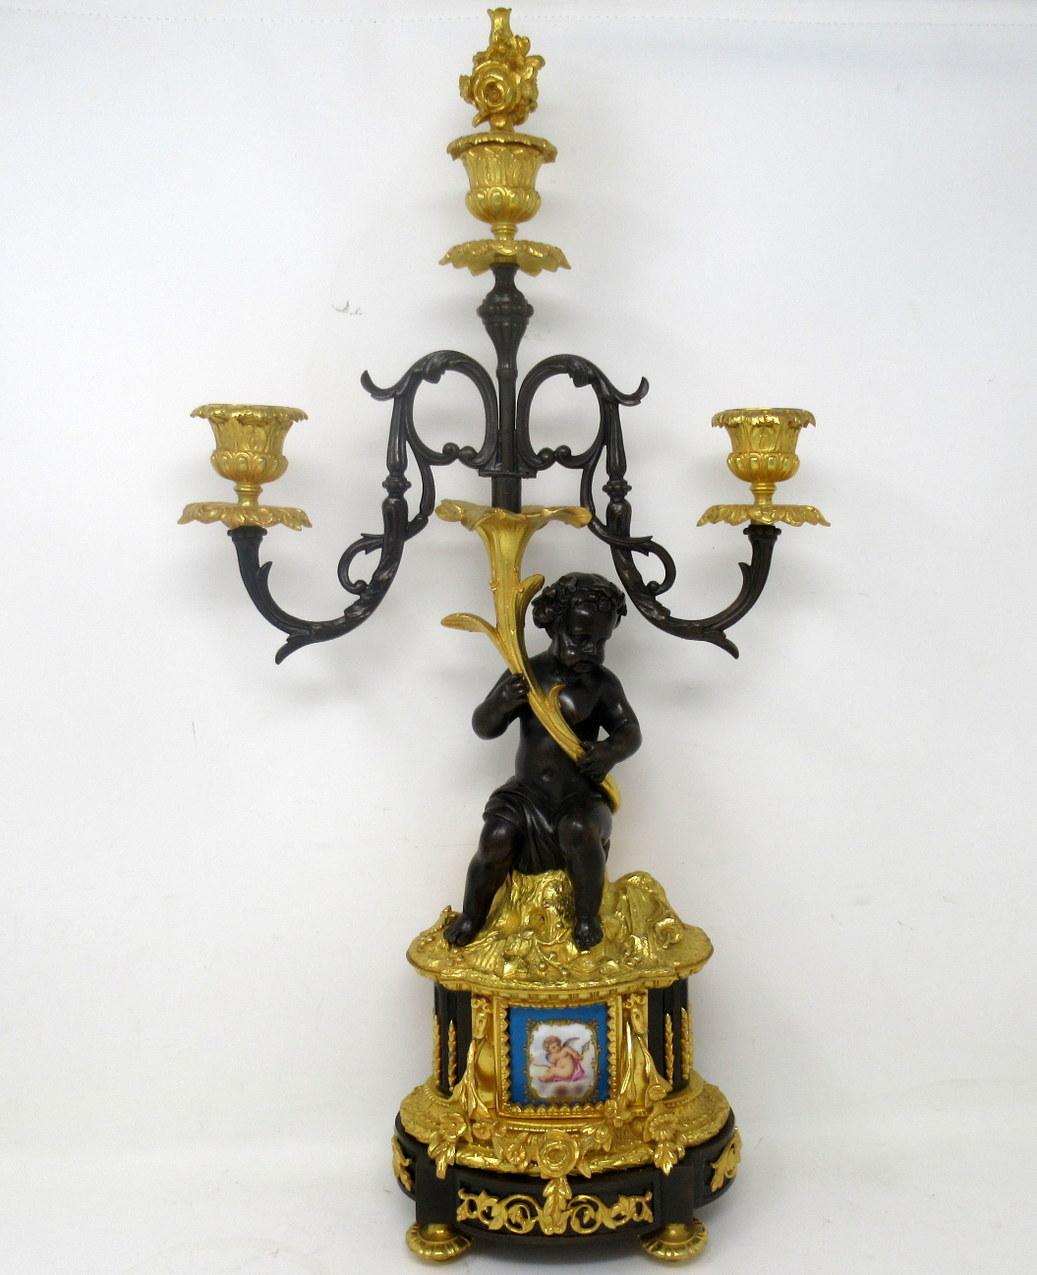 A fine stylish and imposing pair of French three light table or mantle Sevres porcelain mounted ormolu candelabra of outstanding quality. Early to mid-nineteenth century. 

Each with two scrolling leaf capped and one central branch above a chisel